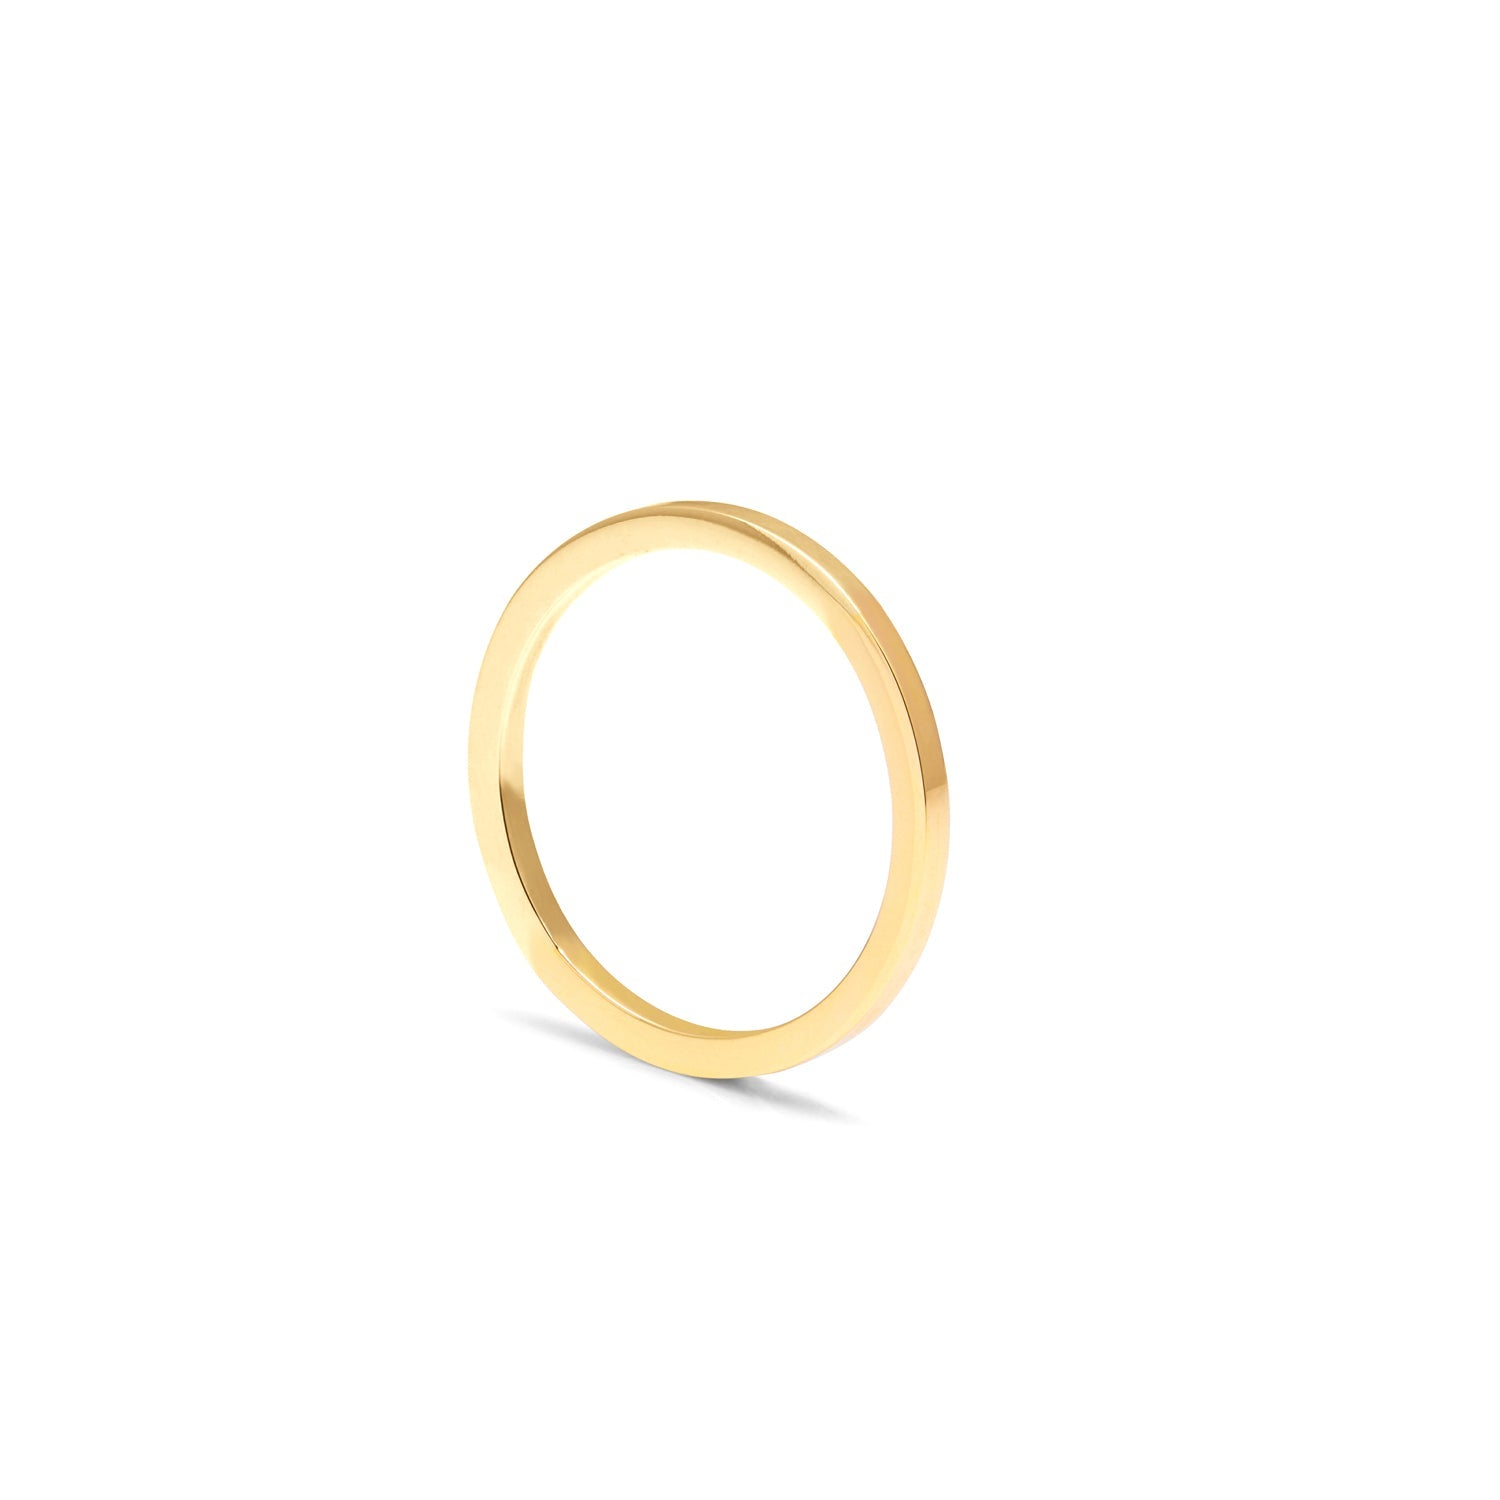 Square 1.5 Ring - 18k Yellow Gold